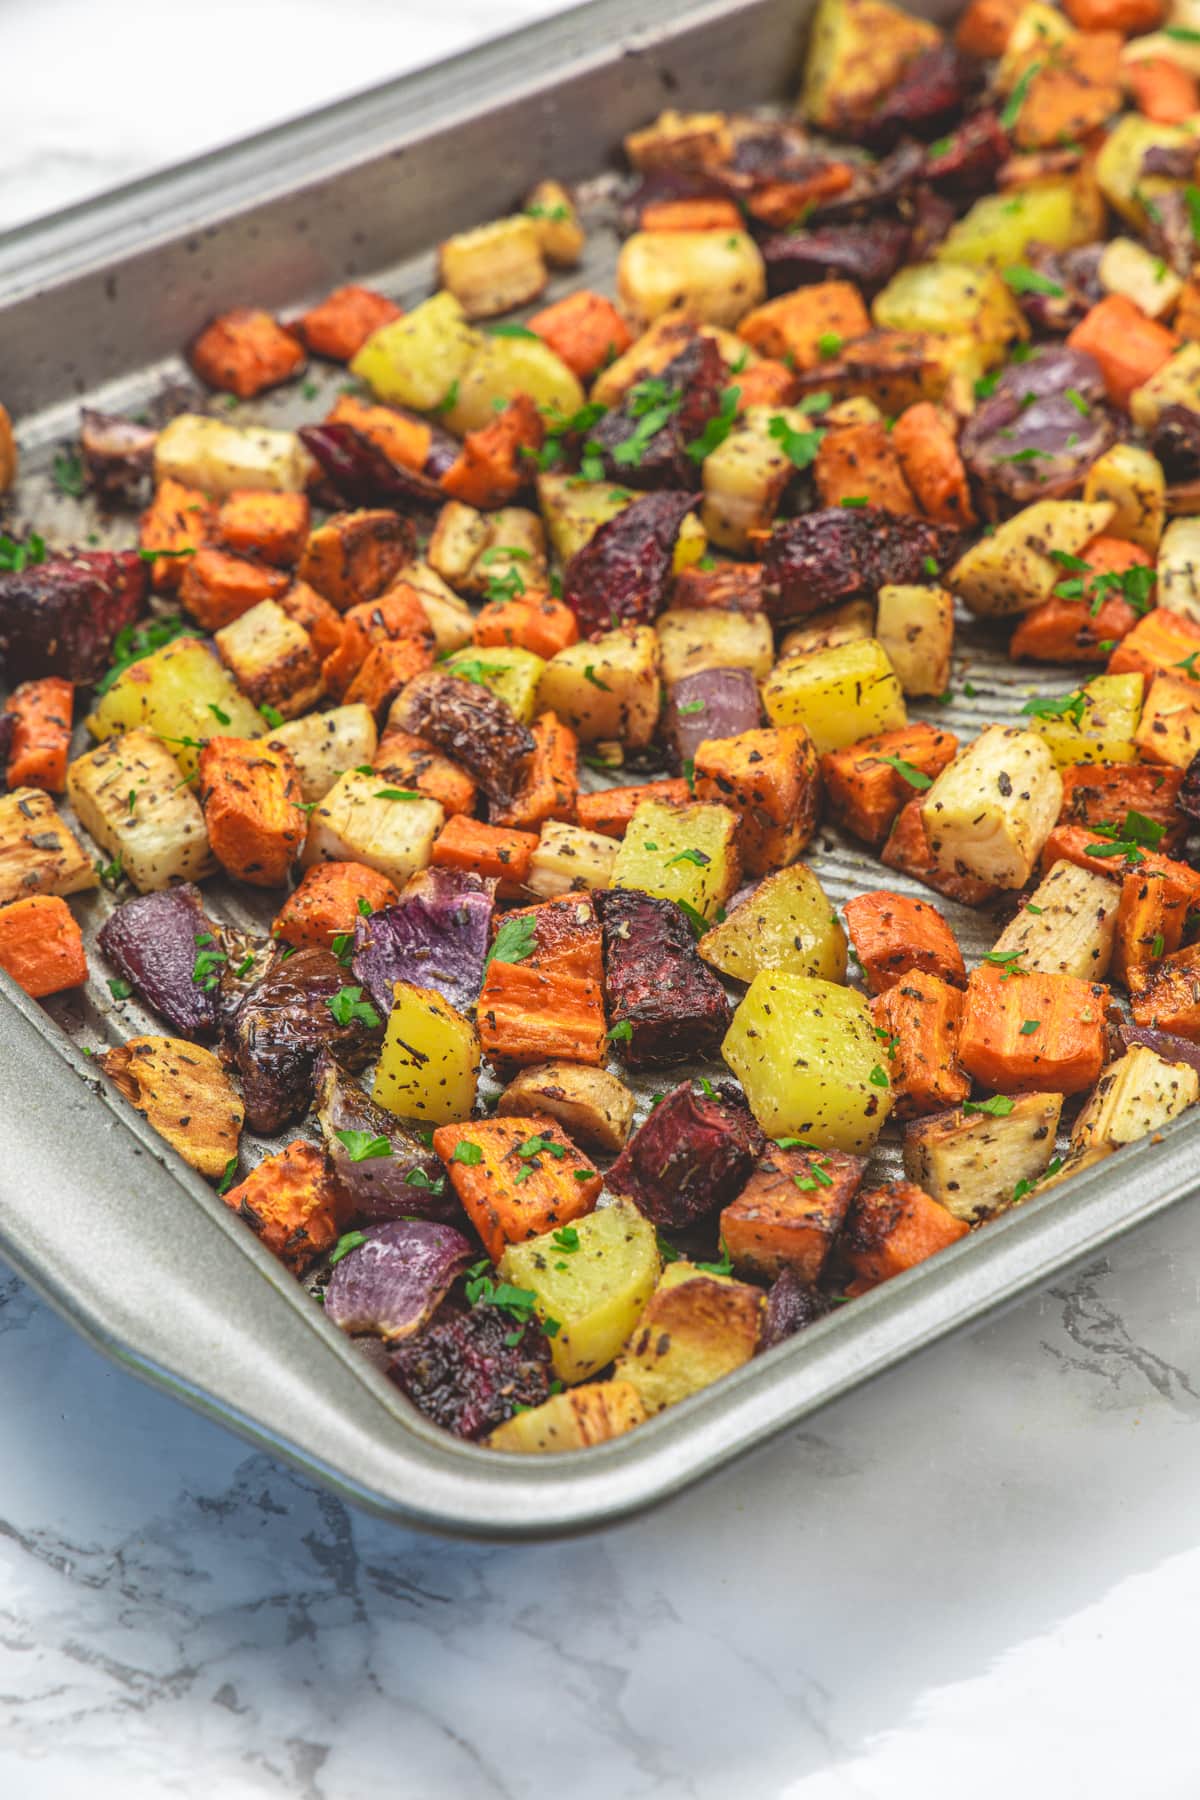 Roasted root vegetables in a baking tray.